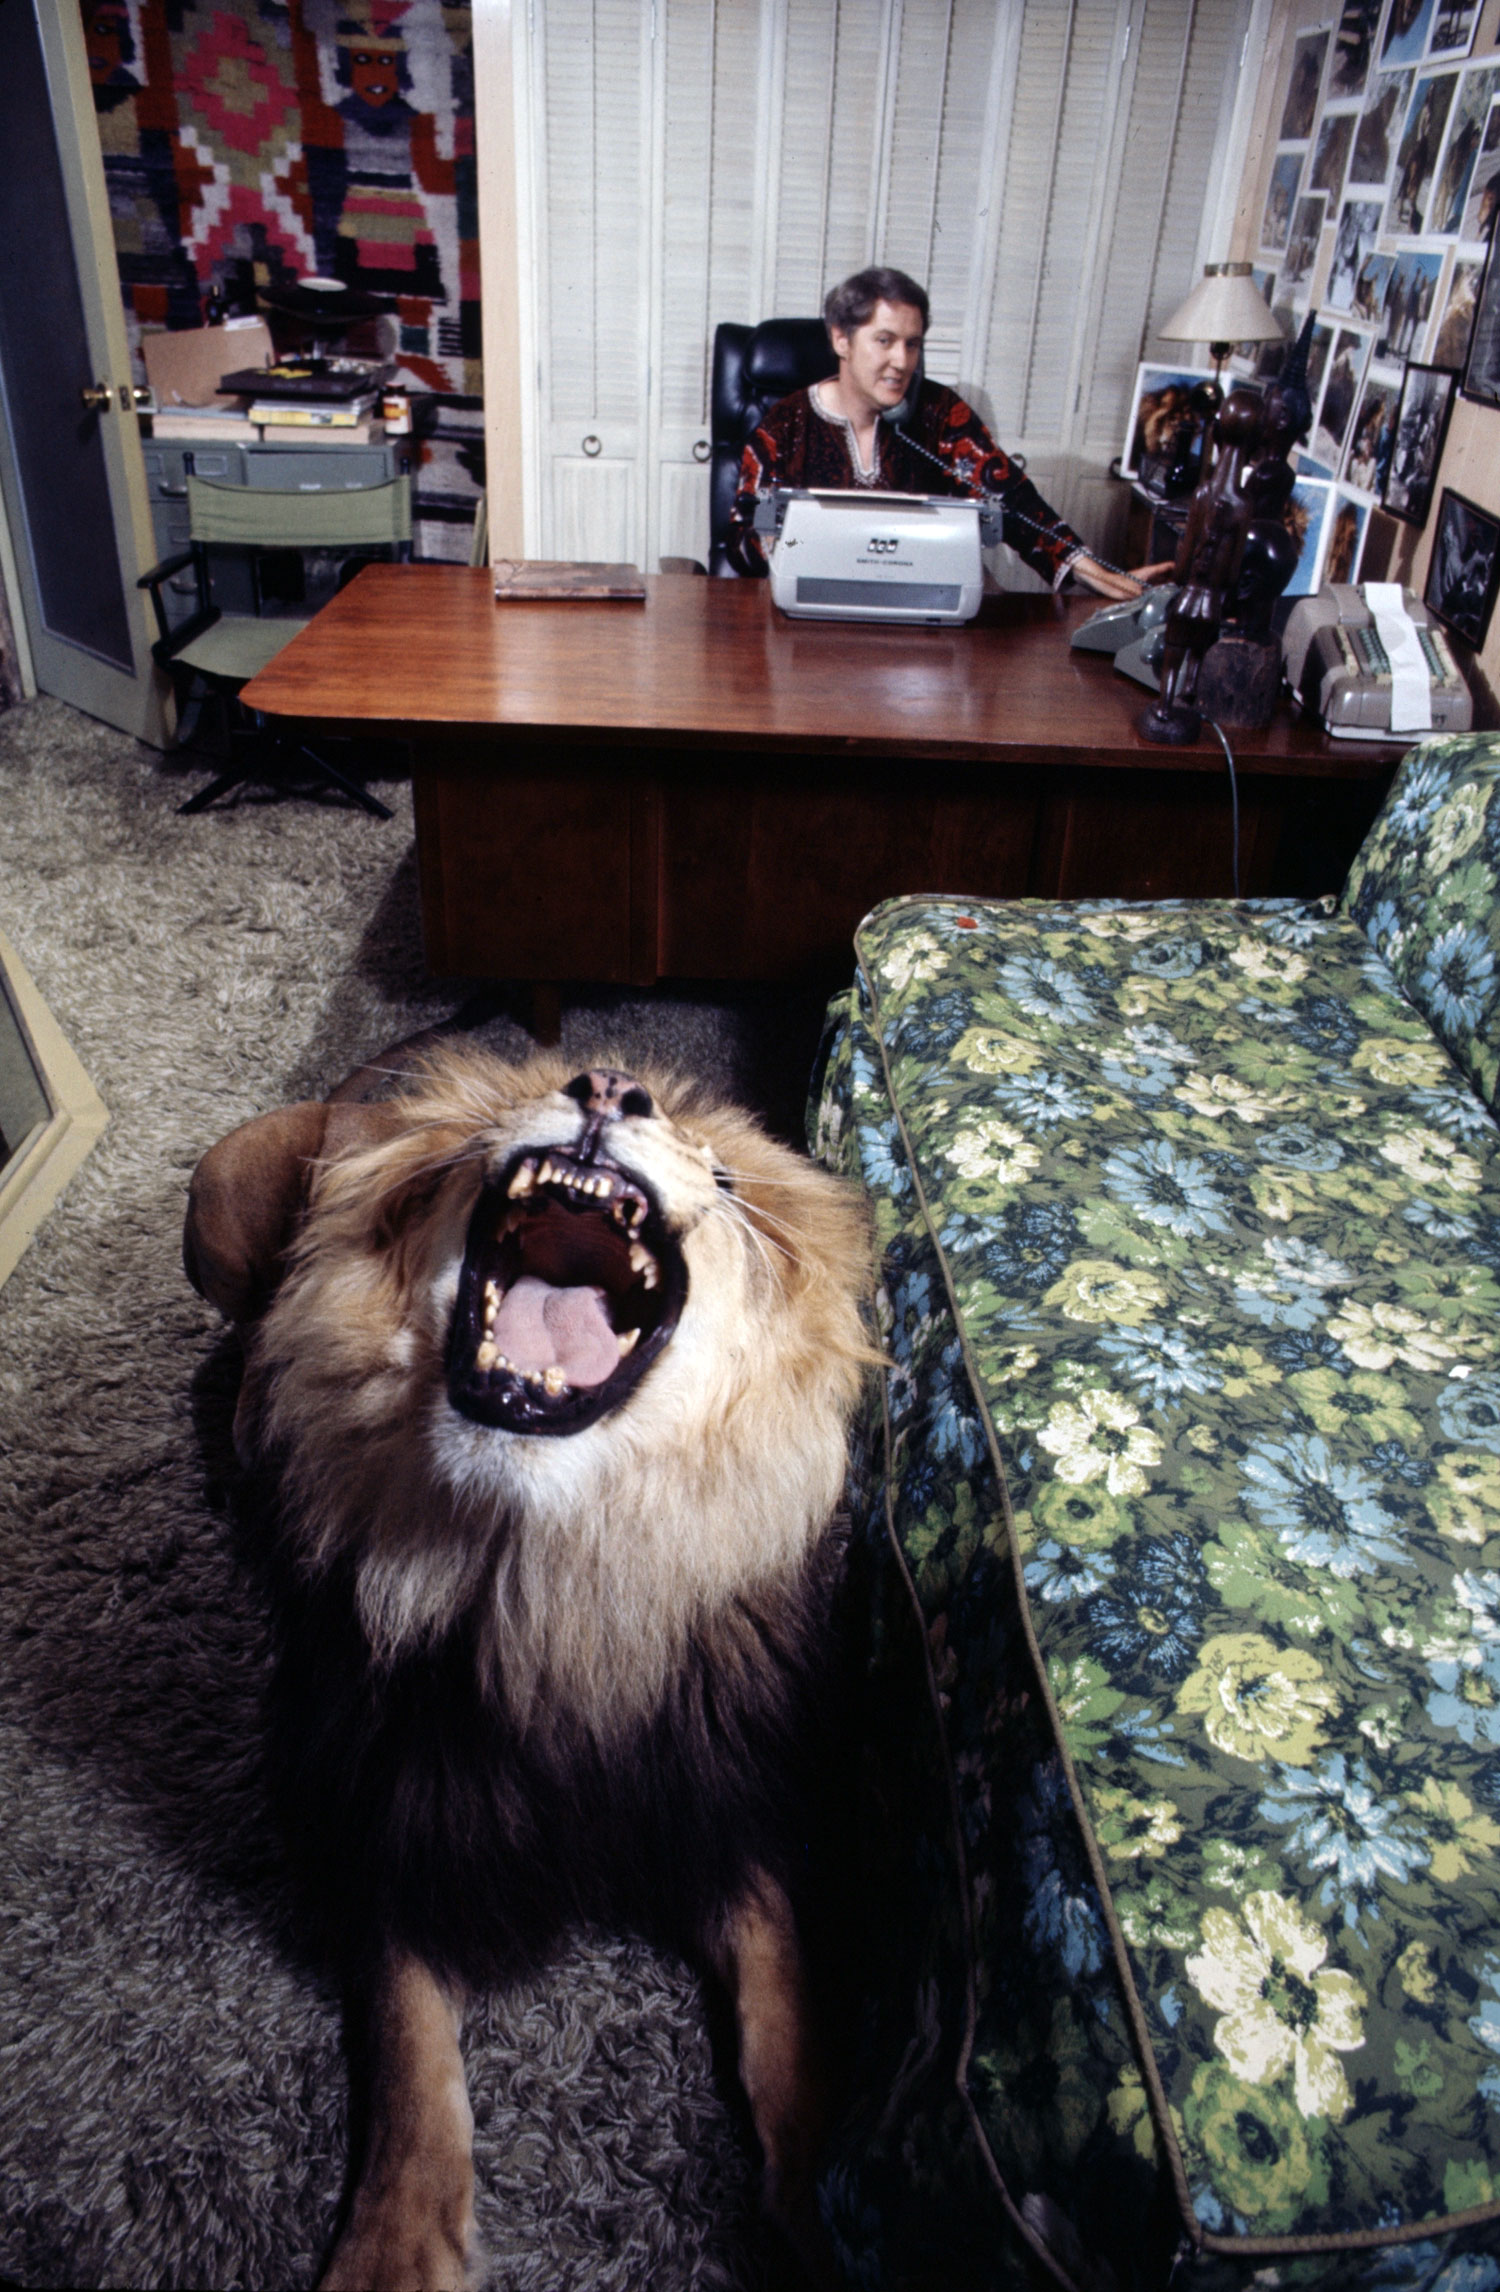 Noel Marshall (husband of Tippi Hedren) works in his study while Neil the pet lion roars, 1971.